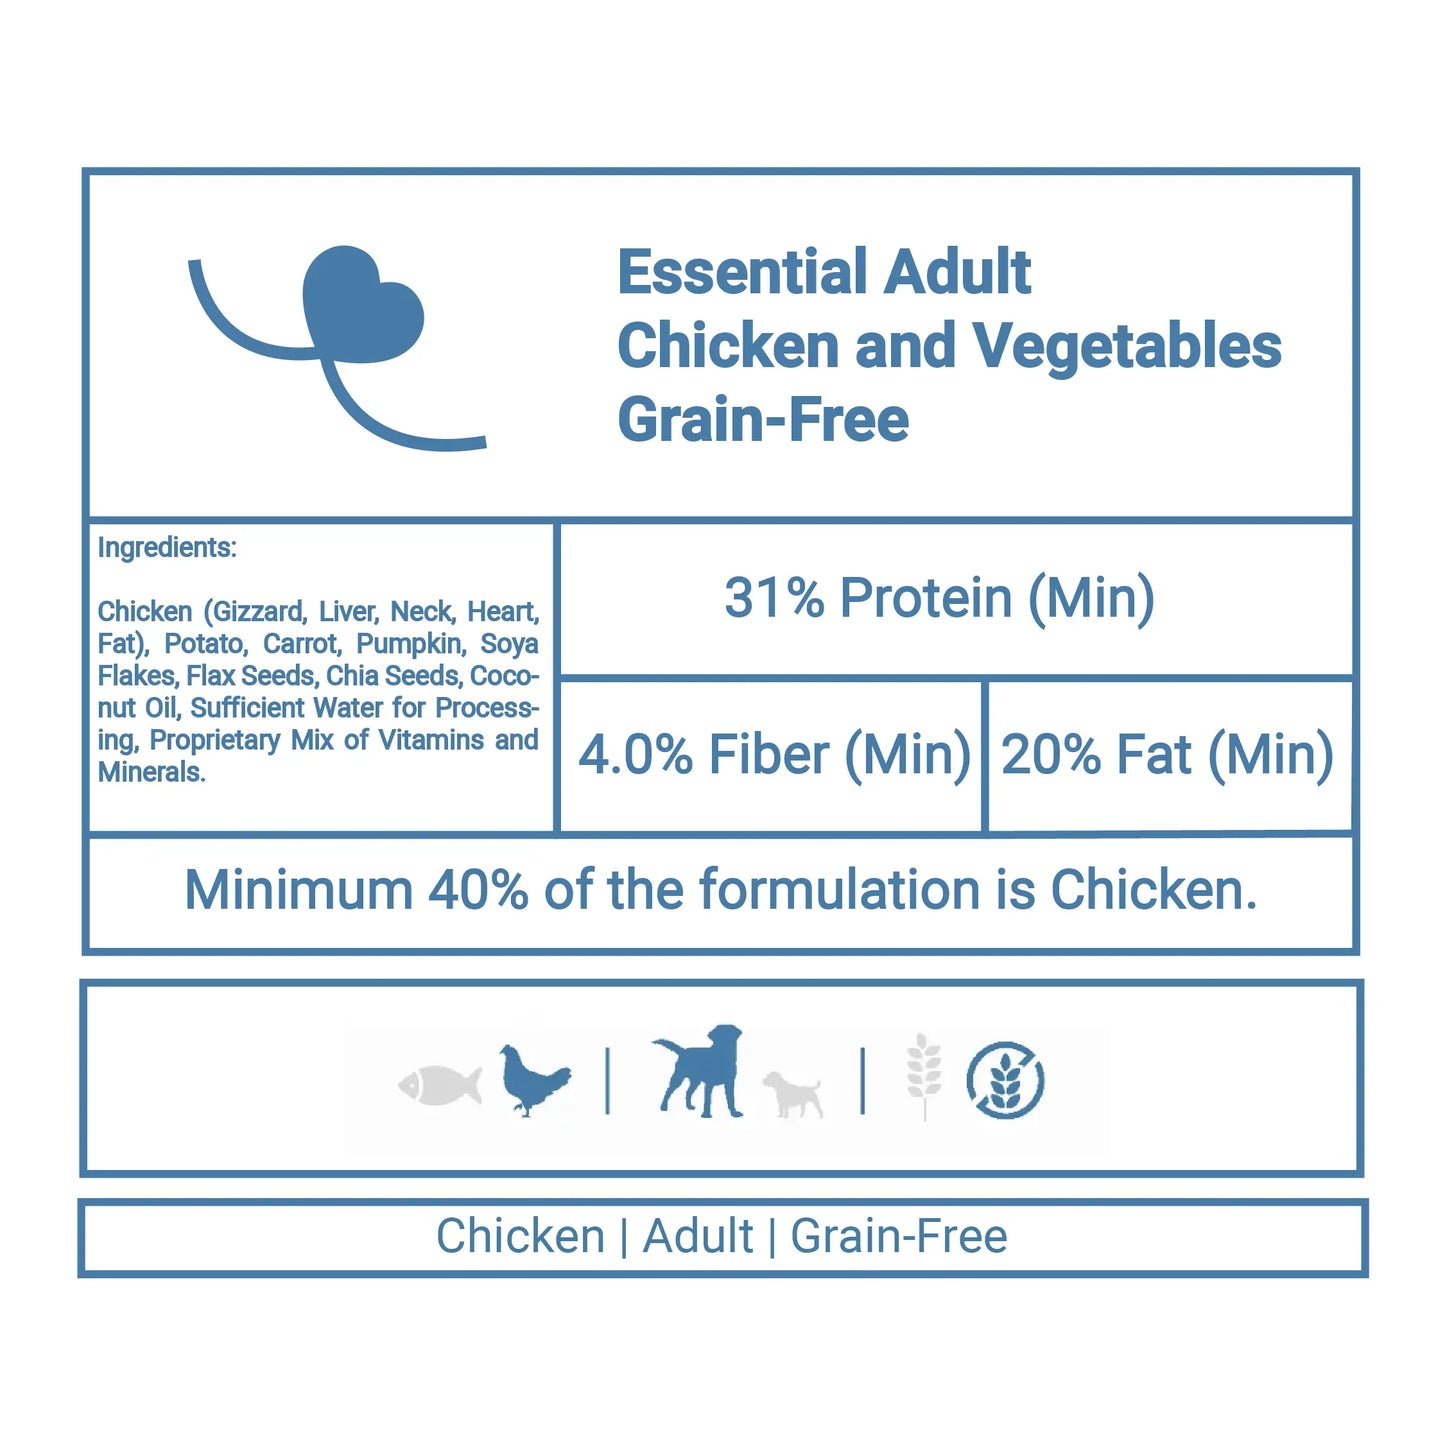 Essential Adult Chicken and Vegetables (Grain Free) - Entry Plan